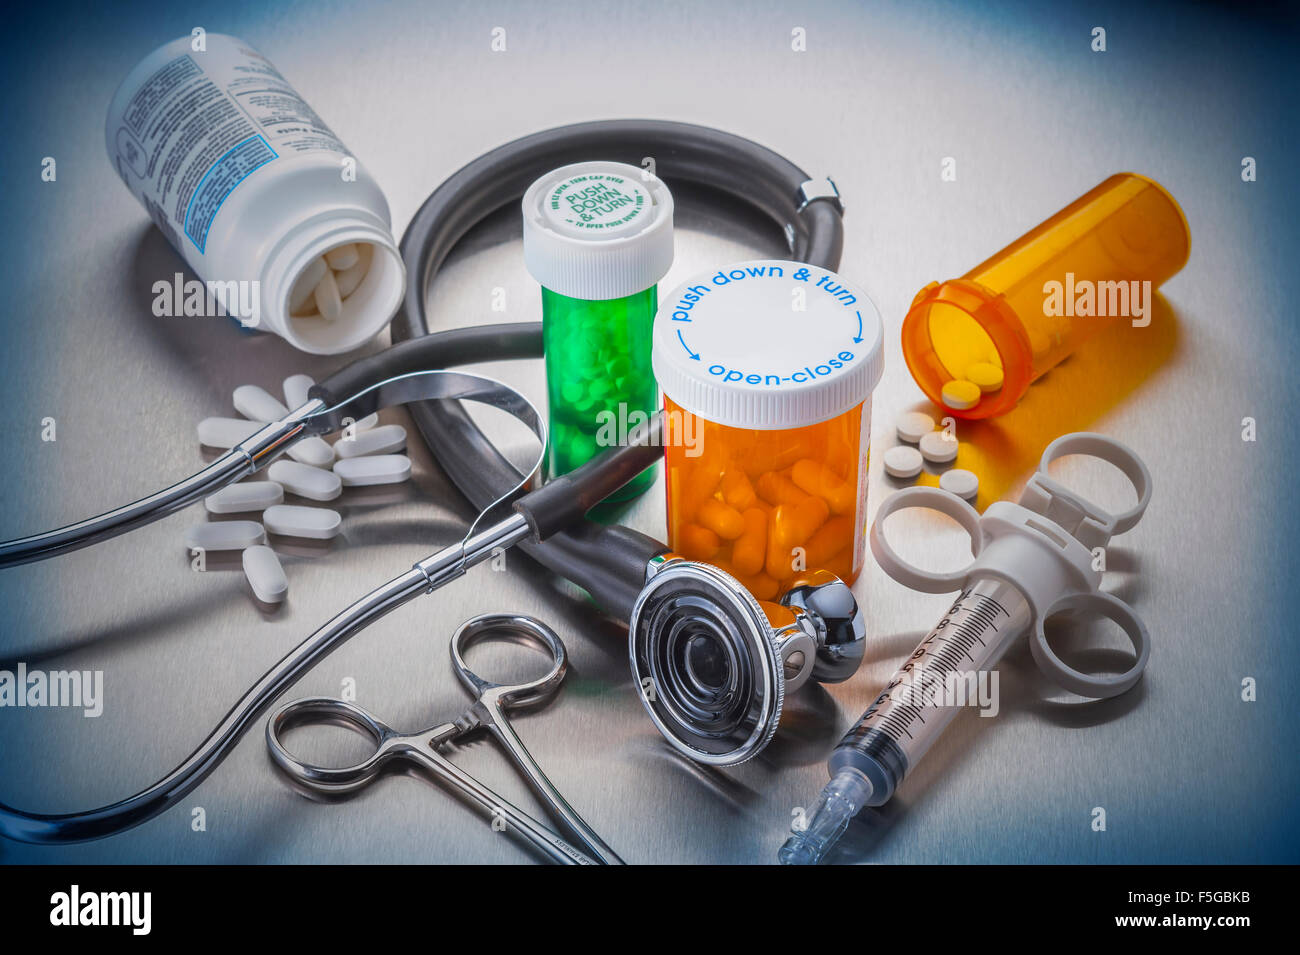 Medical tools used by doctors and nurses in the care of hospitalized patients Stock Photo